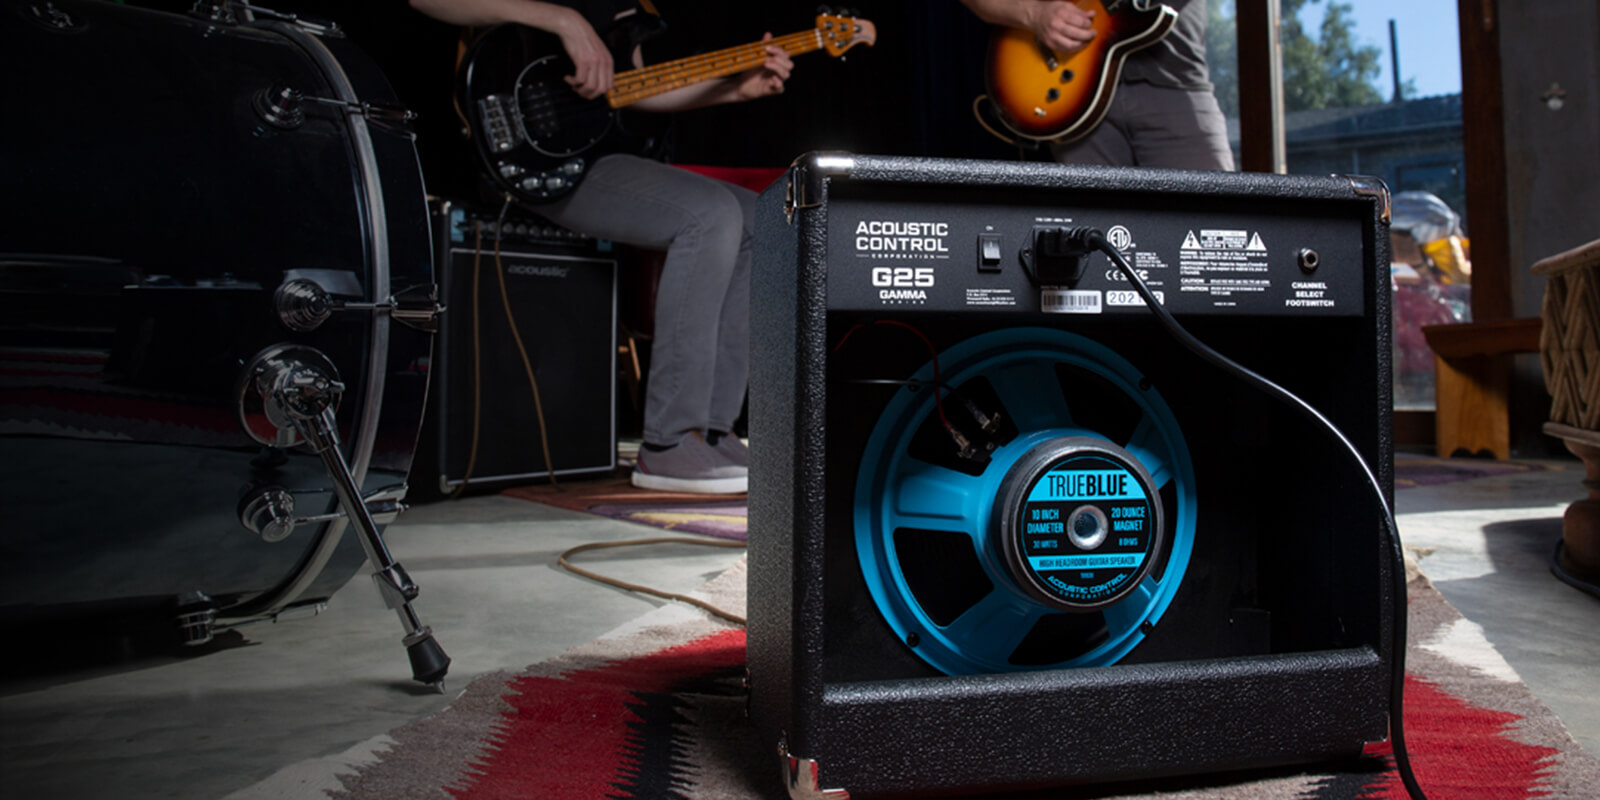 The open back of a GAMMA G25 guitar amp exposes a TRUE BLUE speaker inside. In front of the amp are guitar players and a drum set.